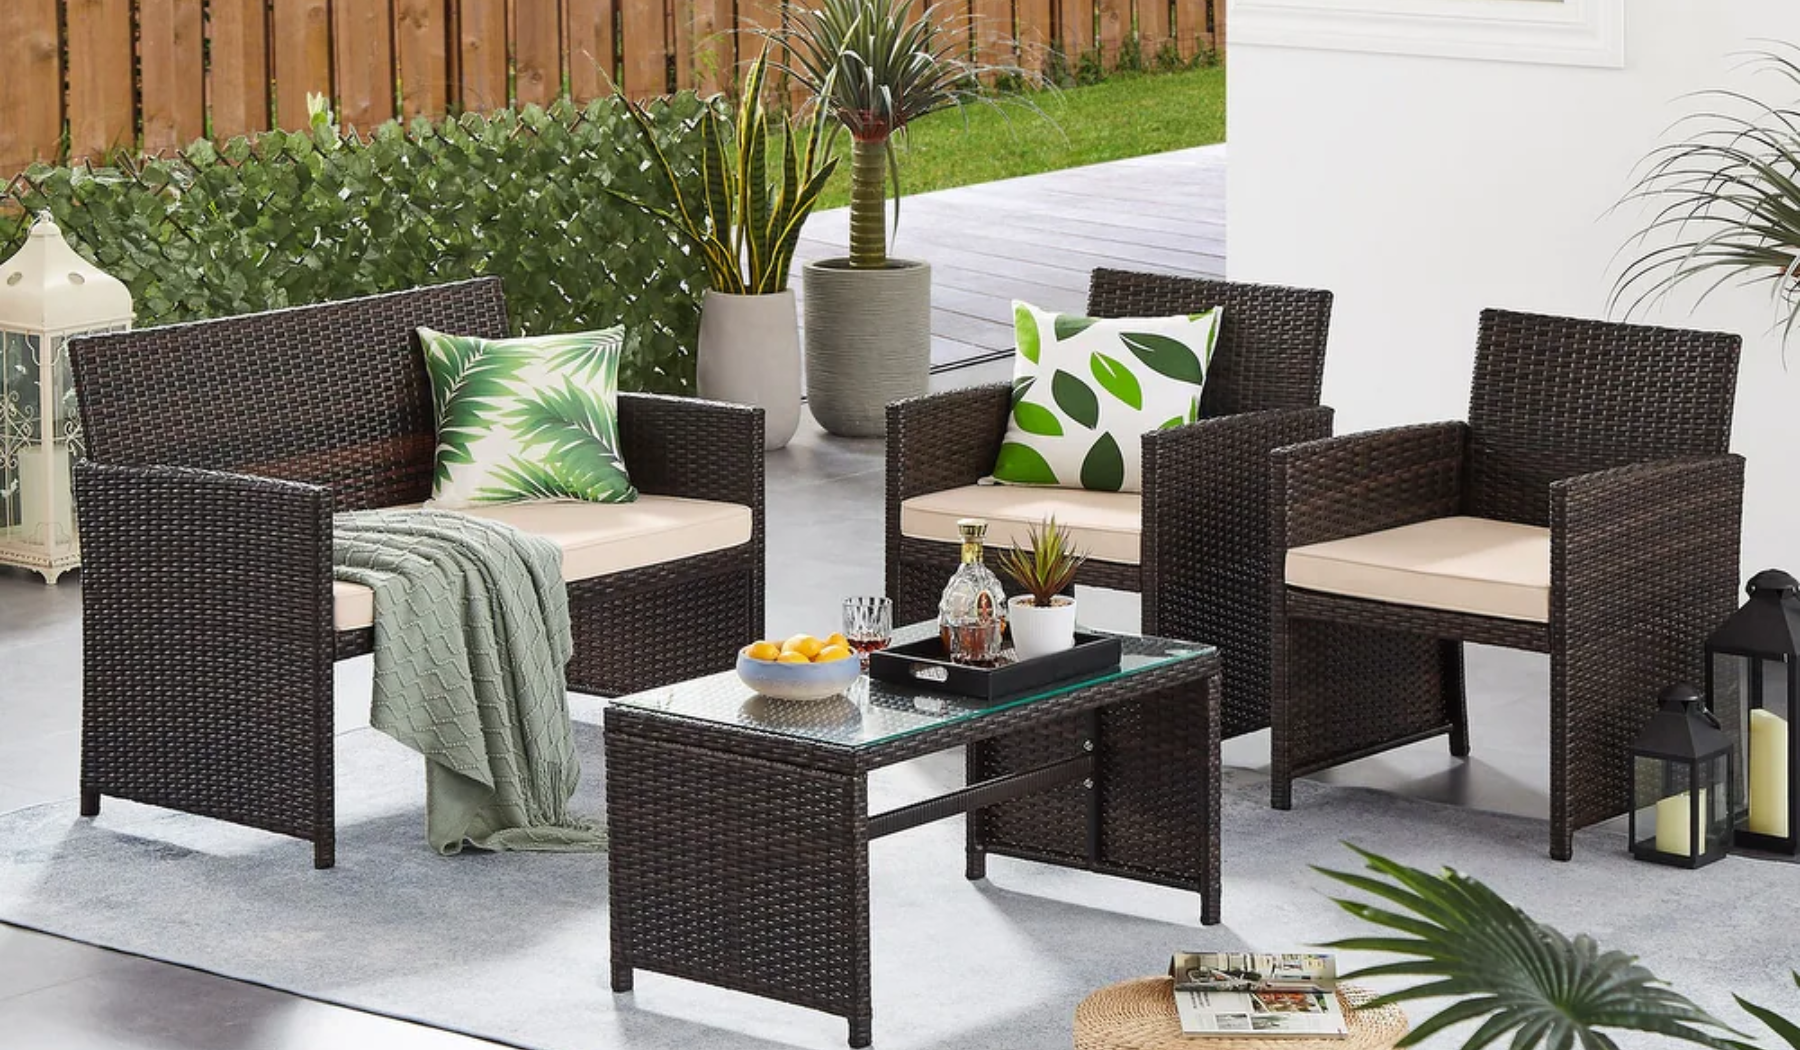 Rattan patio furniture with table arranged outside